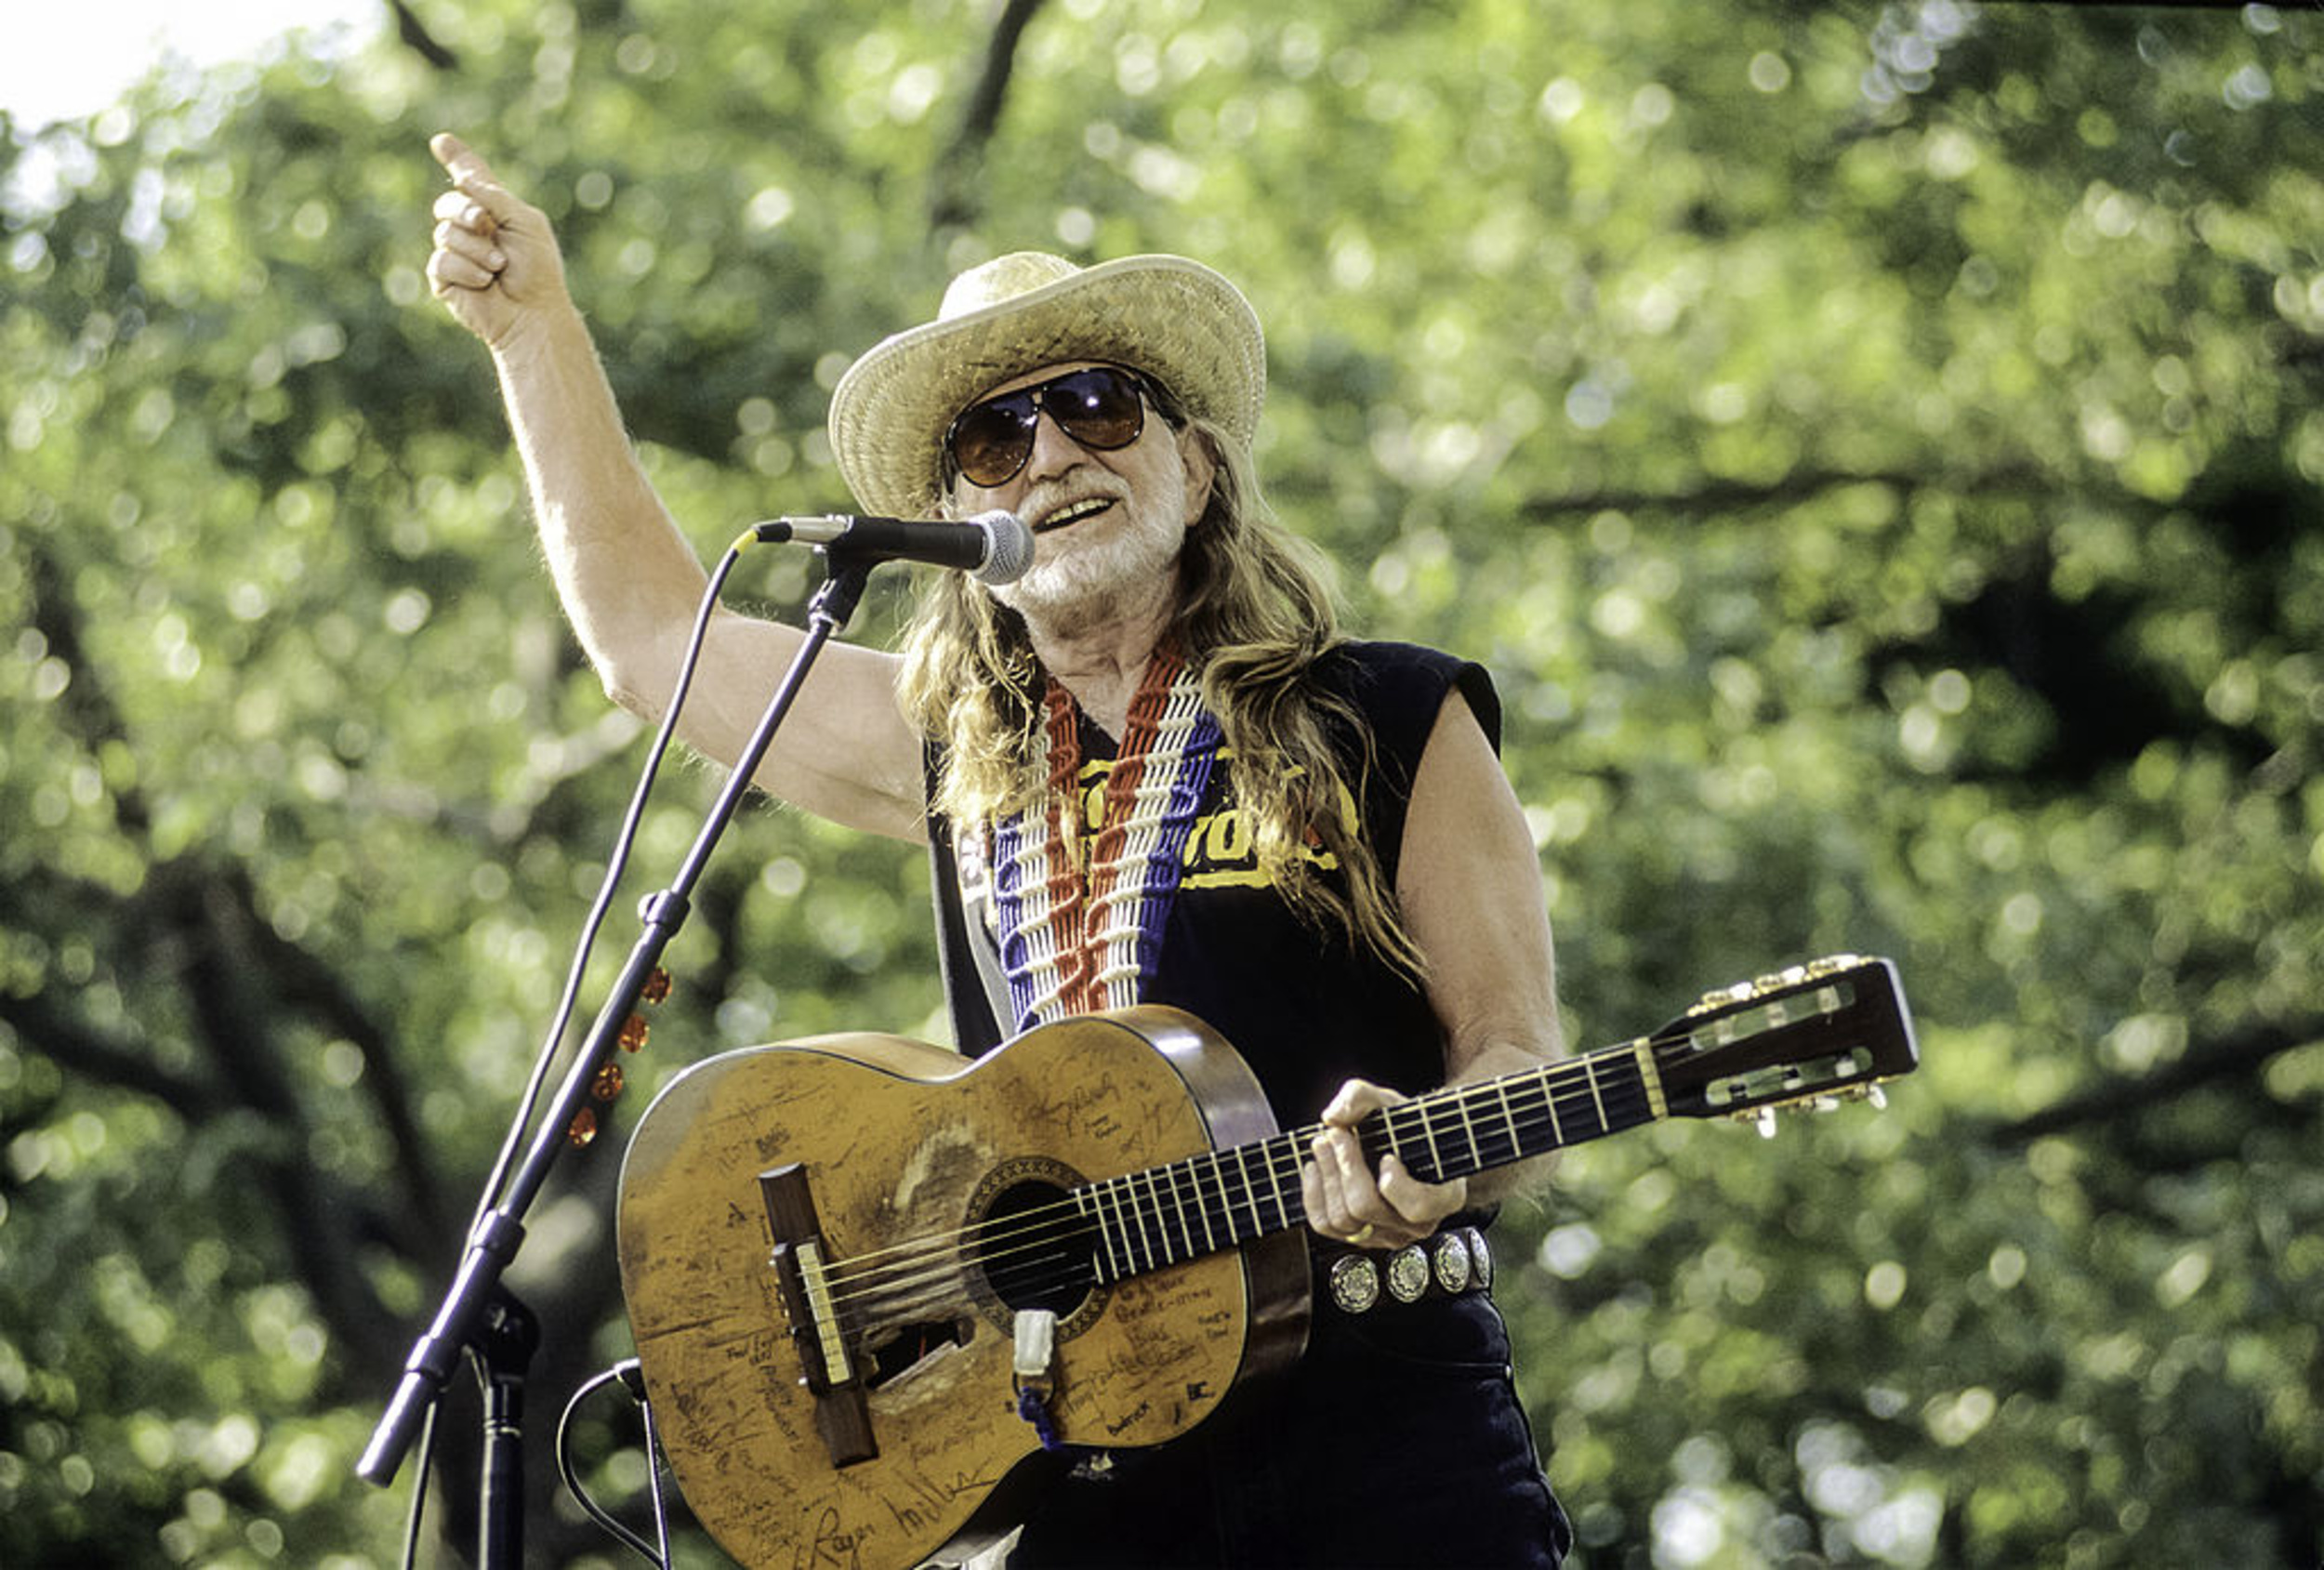 <p>No road trip would be complete without Willie Nelson's 1980 classic "On The Road Again," perfect for when you're traveling with a big group of friends for a weekend getaway. </p><p>You may also like: <a href='https://www.yardbarker.com/entertainment/articles/the_20_best_modern_rom_coms/s1__39887355'>The 20 best modern rom-coms</a></p>